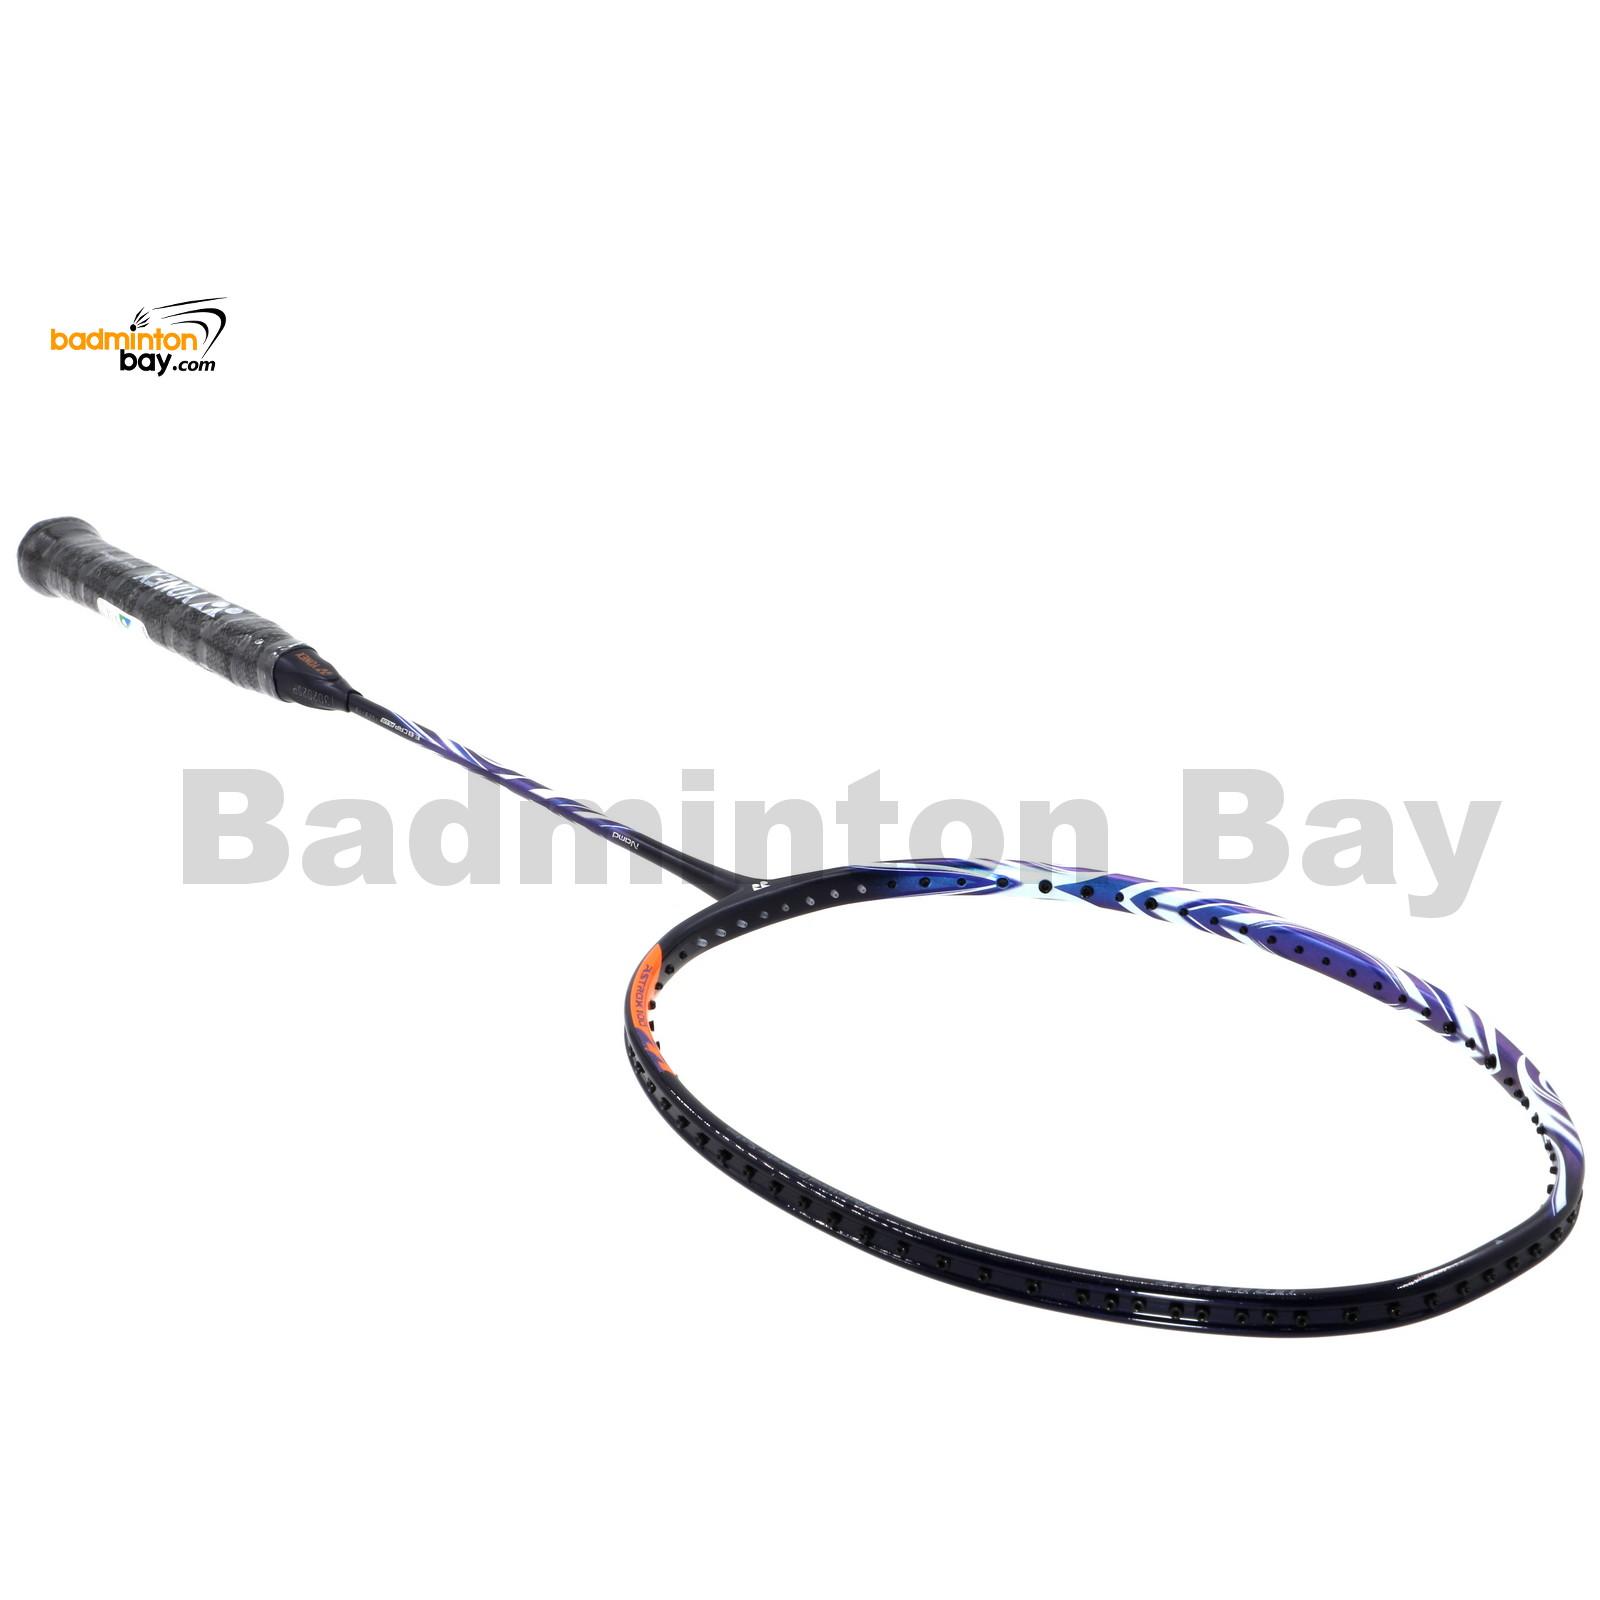 Details about   New Yonex Astrox 100ZZ AX100ZZ Badminton Racket 4UG5 Made in Japan Free Shipping 